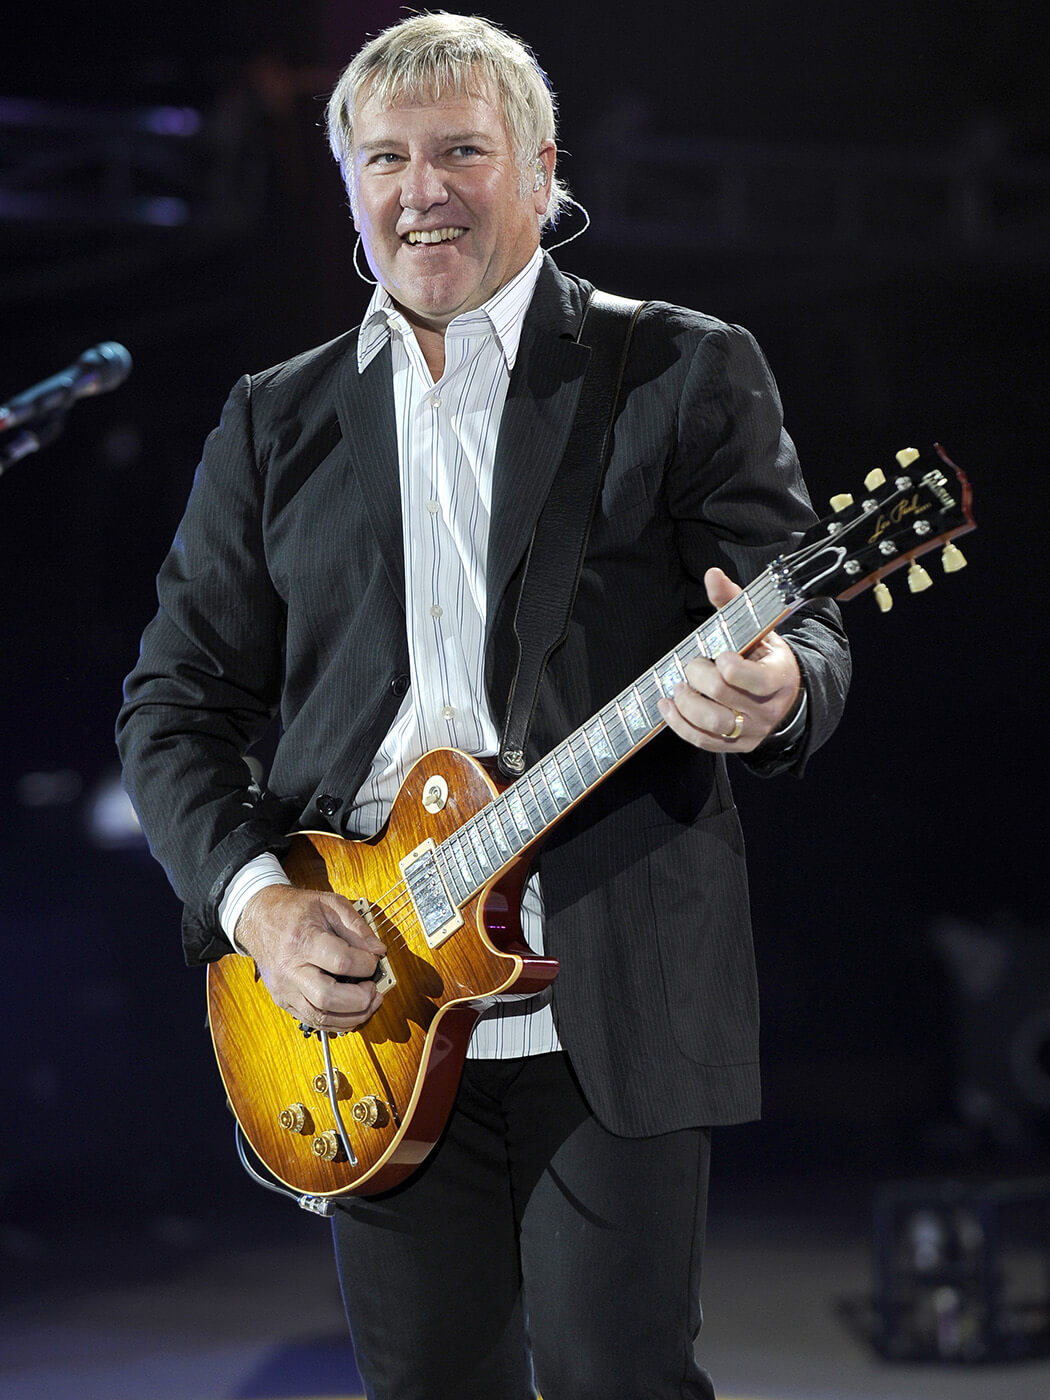 Alex Lifeson of Rush performs part of the bands Time Machine Tour 2010 at Red Rocks Amphitheatre on August 16, 2010 in Morrison, Colorado.